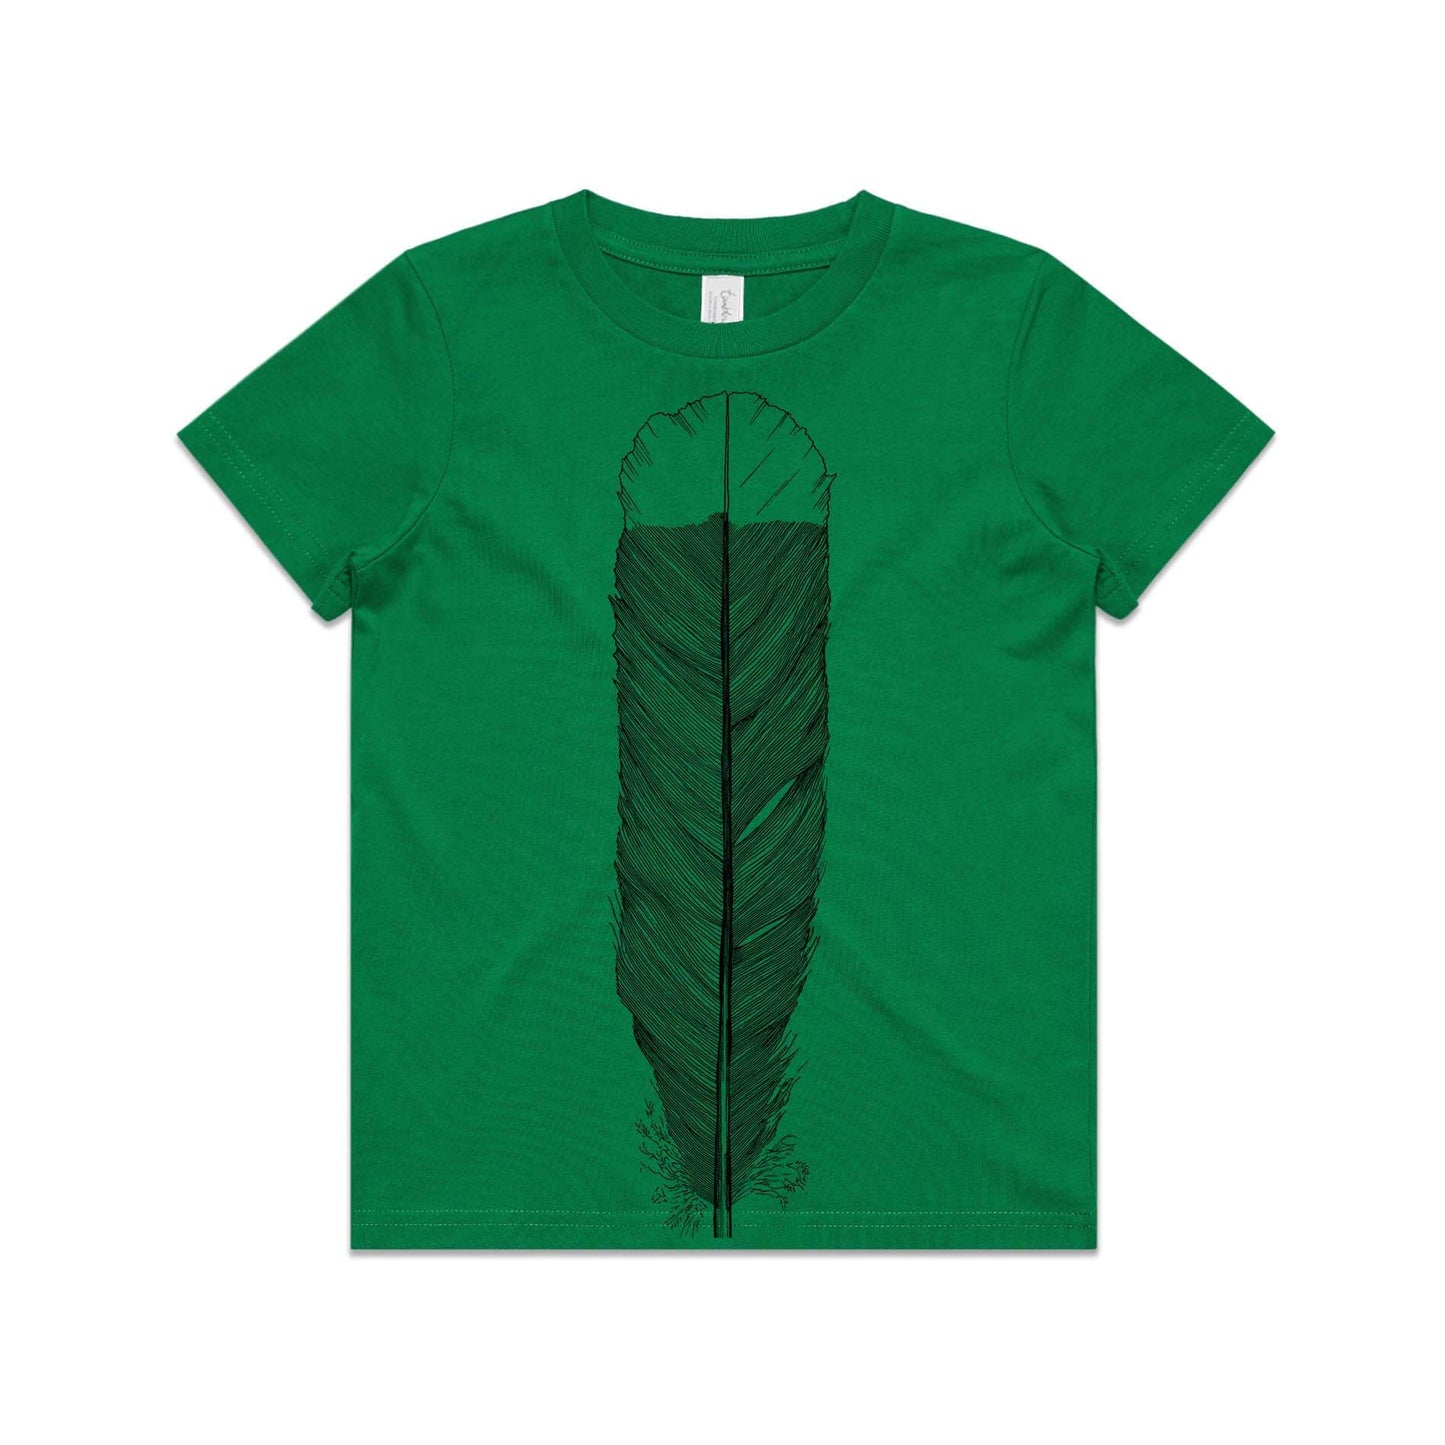 Green, cotton kids' t-shirt with screen printed Kids huia feather design.